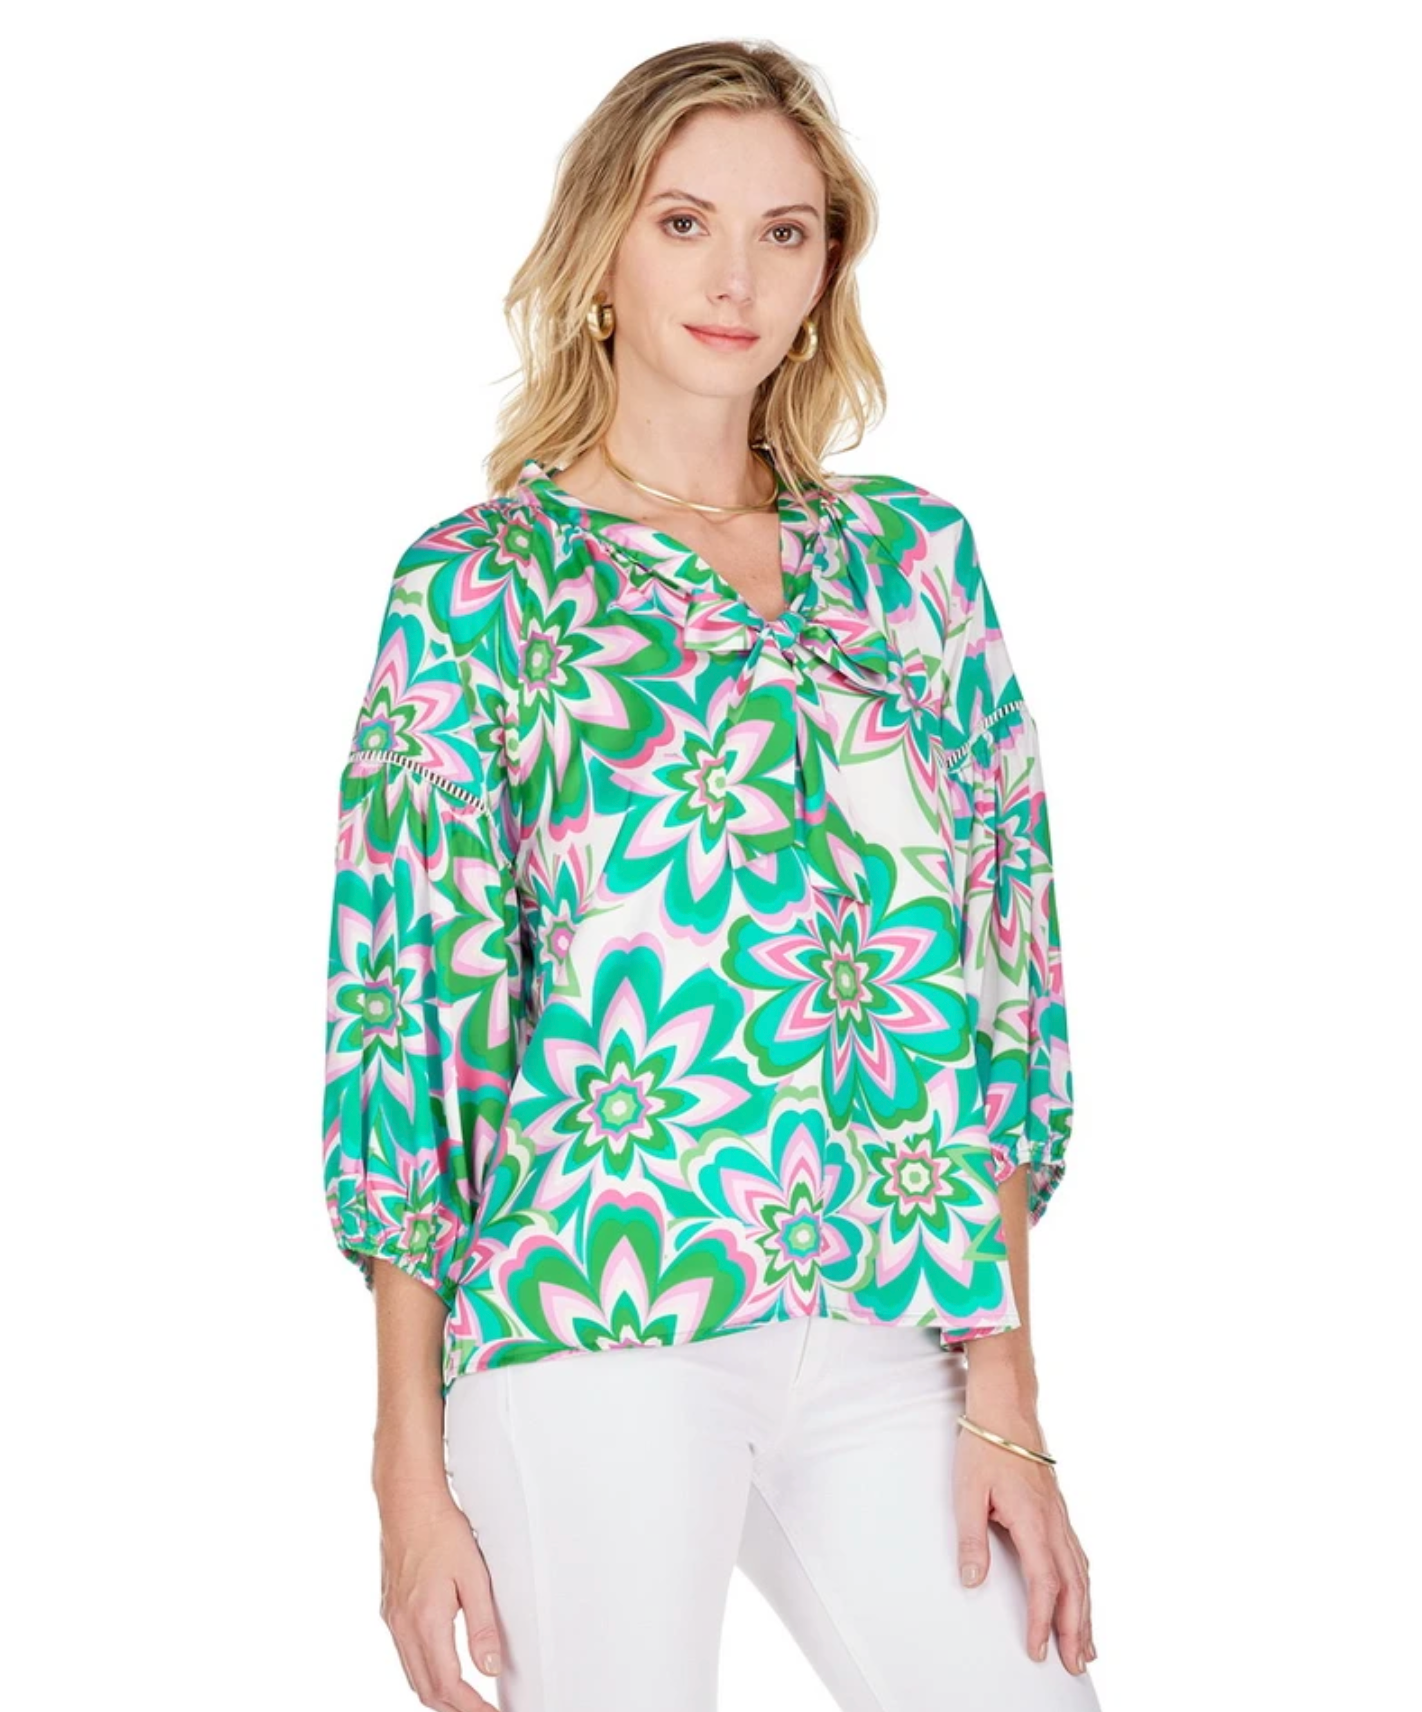 Print Top with Bow in Flower Burst - The French Shoppe